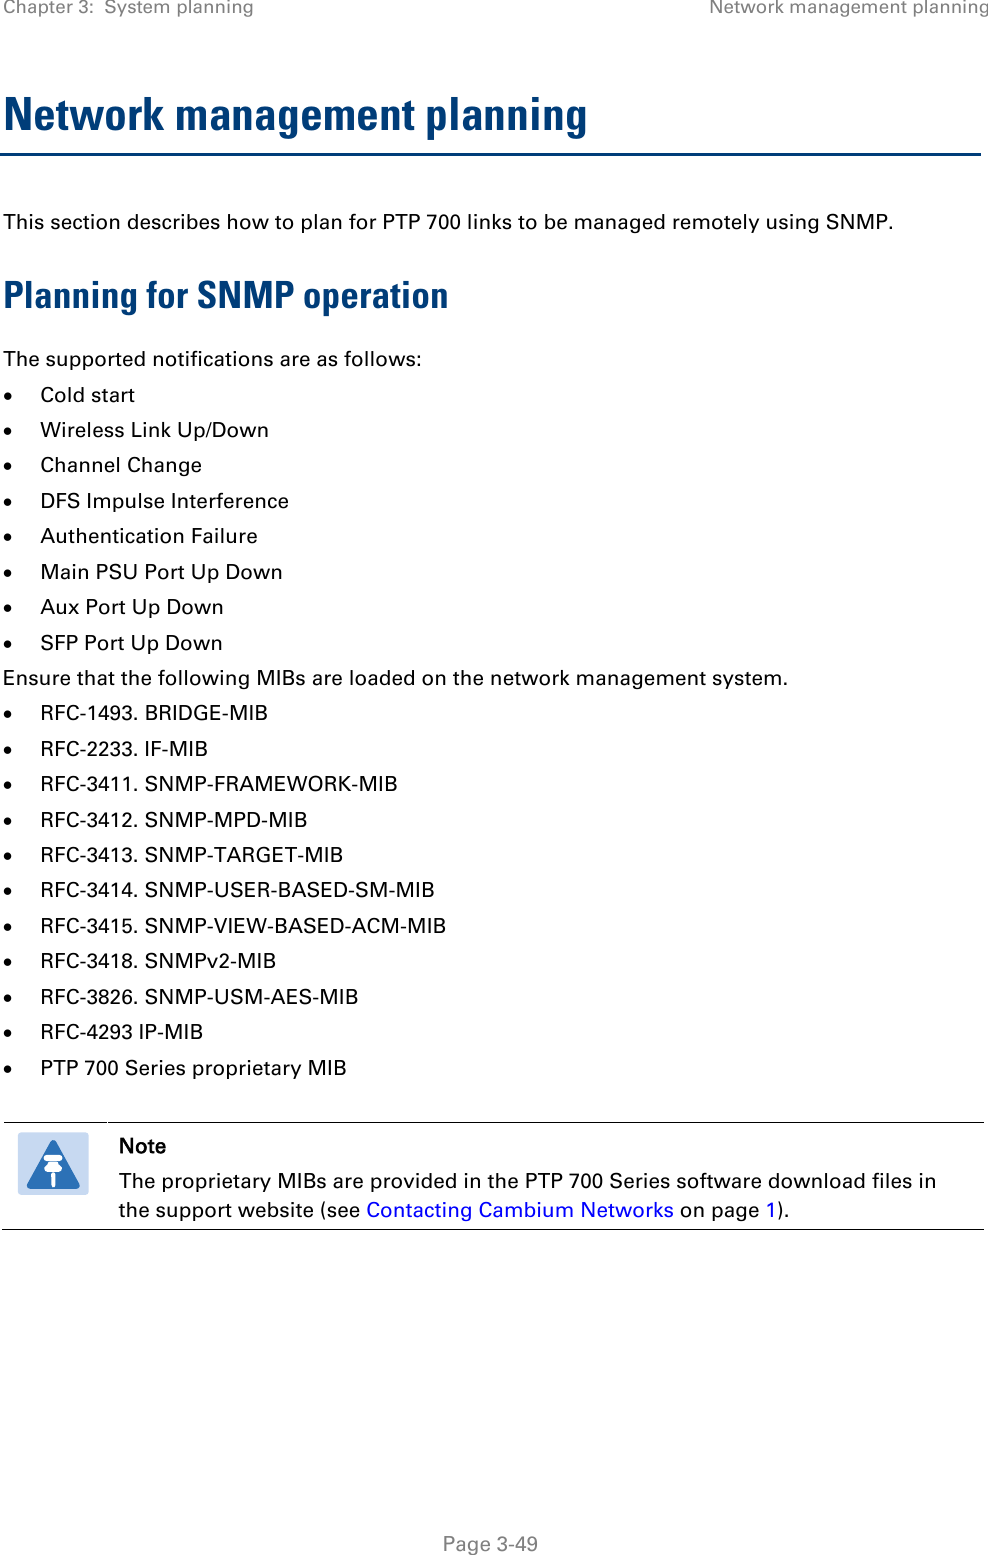 Chapter 3:  System planning Network management planning  Network management planning This section describes how to plan for PTP 700 links to be managed remotely using SNMP. Planning for SNMP operation The supported notifications are as follows: • Cold start • Wireless Link Up/Down • Channel Change • DFS Impulse Interference • Authentication Failure • Main PSU Port Up Down • Aux Port Up Down • SFP Port Up Down Ensure that the following MIBs are loaded on the network management system. • RFC-1493. BRIDGE-MIB • RFC-2233. IF-MIB • RFC-3411. SNMP-FRAMEWORK-MIB • RFC-3412. SNMP-MPD-MIB • RFC-3413. SNMP-TARGET-MIB • RFC-3414. SNMP-USER-BASED-SM-MIB • RFC-3415. SNMP-VIEW-BASED-ACM-MIB • RFC-3418. SNMPv2-MIB • RFC-3826. SNMP-USM-AES-MIB • RFC-4293 IP-MIB • PTP 700 Series proprietary MIB   Note The proprietary MIBs are provided in the PTP 700 Series software download files in the support website (see Contacting Cambium Networks on page 1).    Page 3-49 